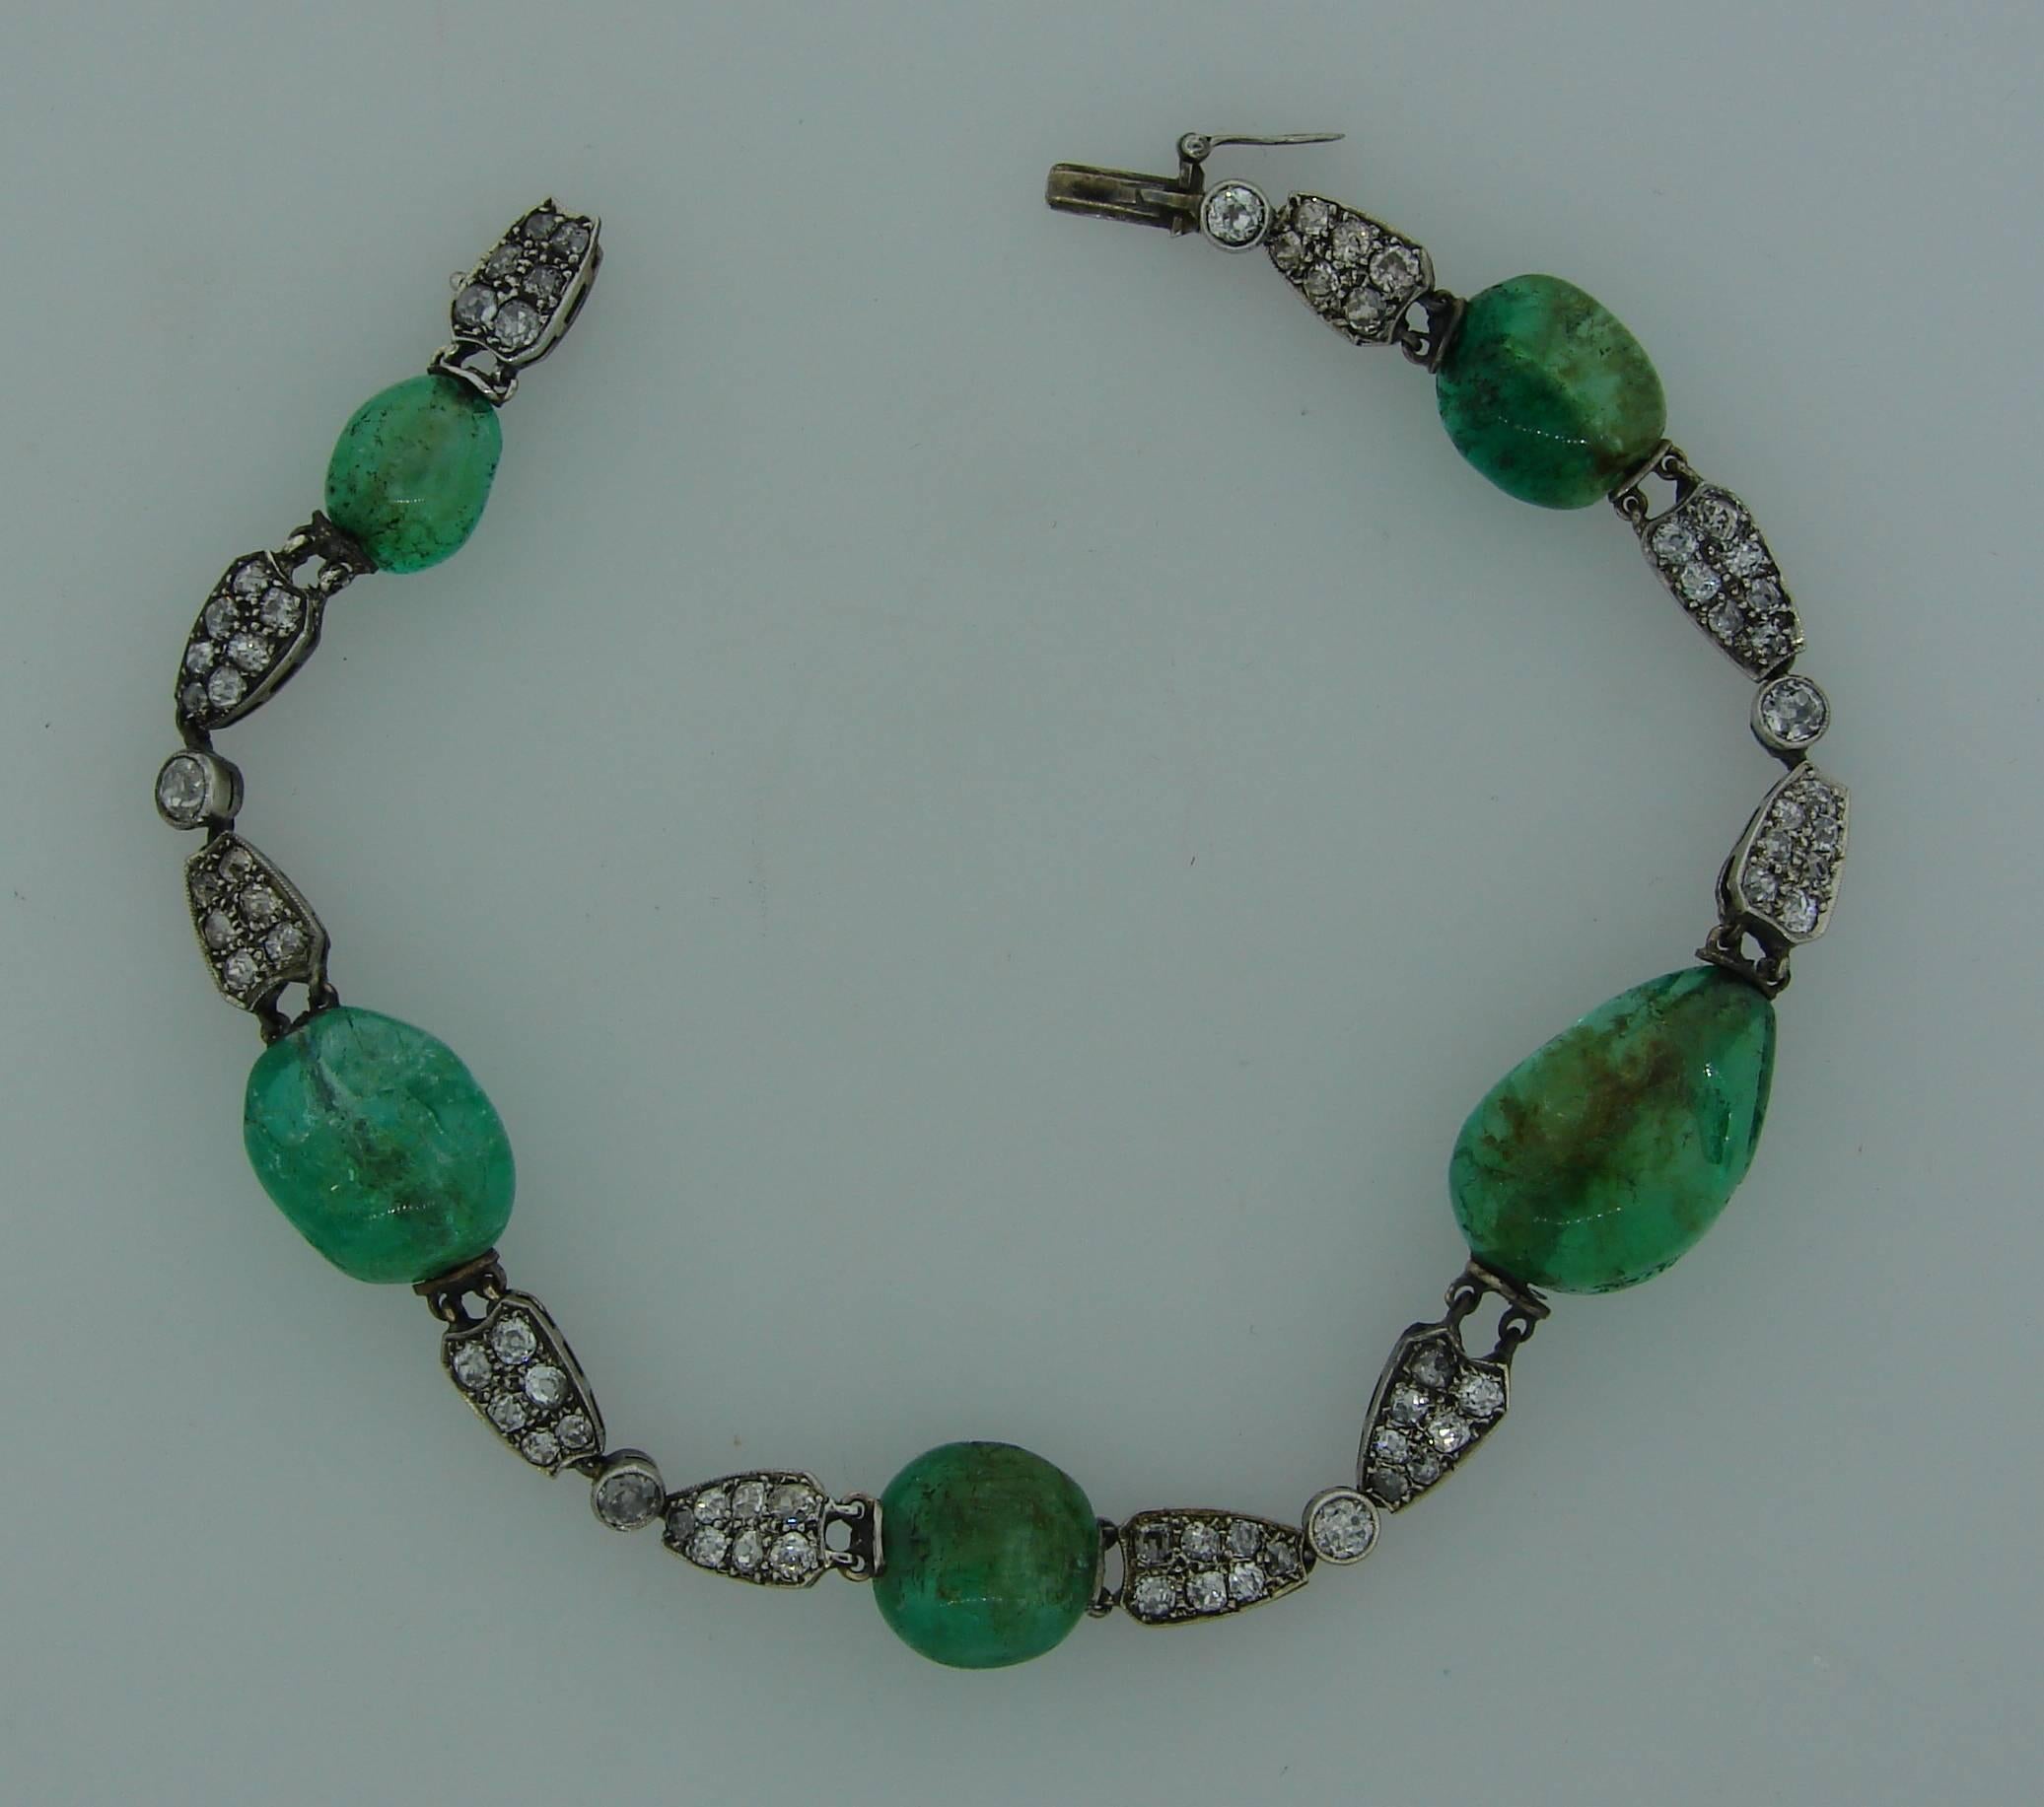 Lovely Art Deco bracelet created in the 1910's. Features five emerald beads alternating with knight shape links made of 18k (tested) white gold and set with old mine cut diamonds (total weight approximately 2.0 carats). 
The bracelet is 8